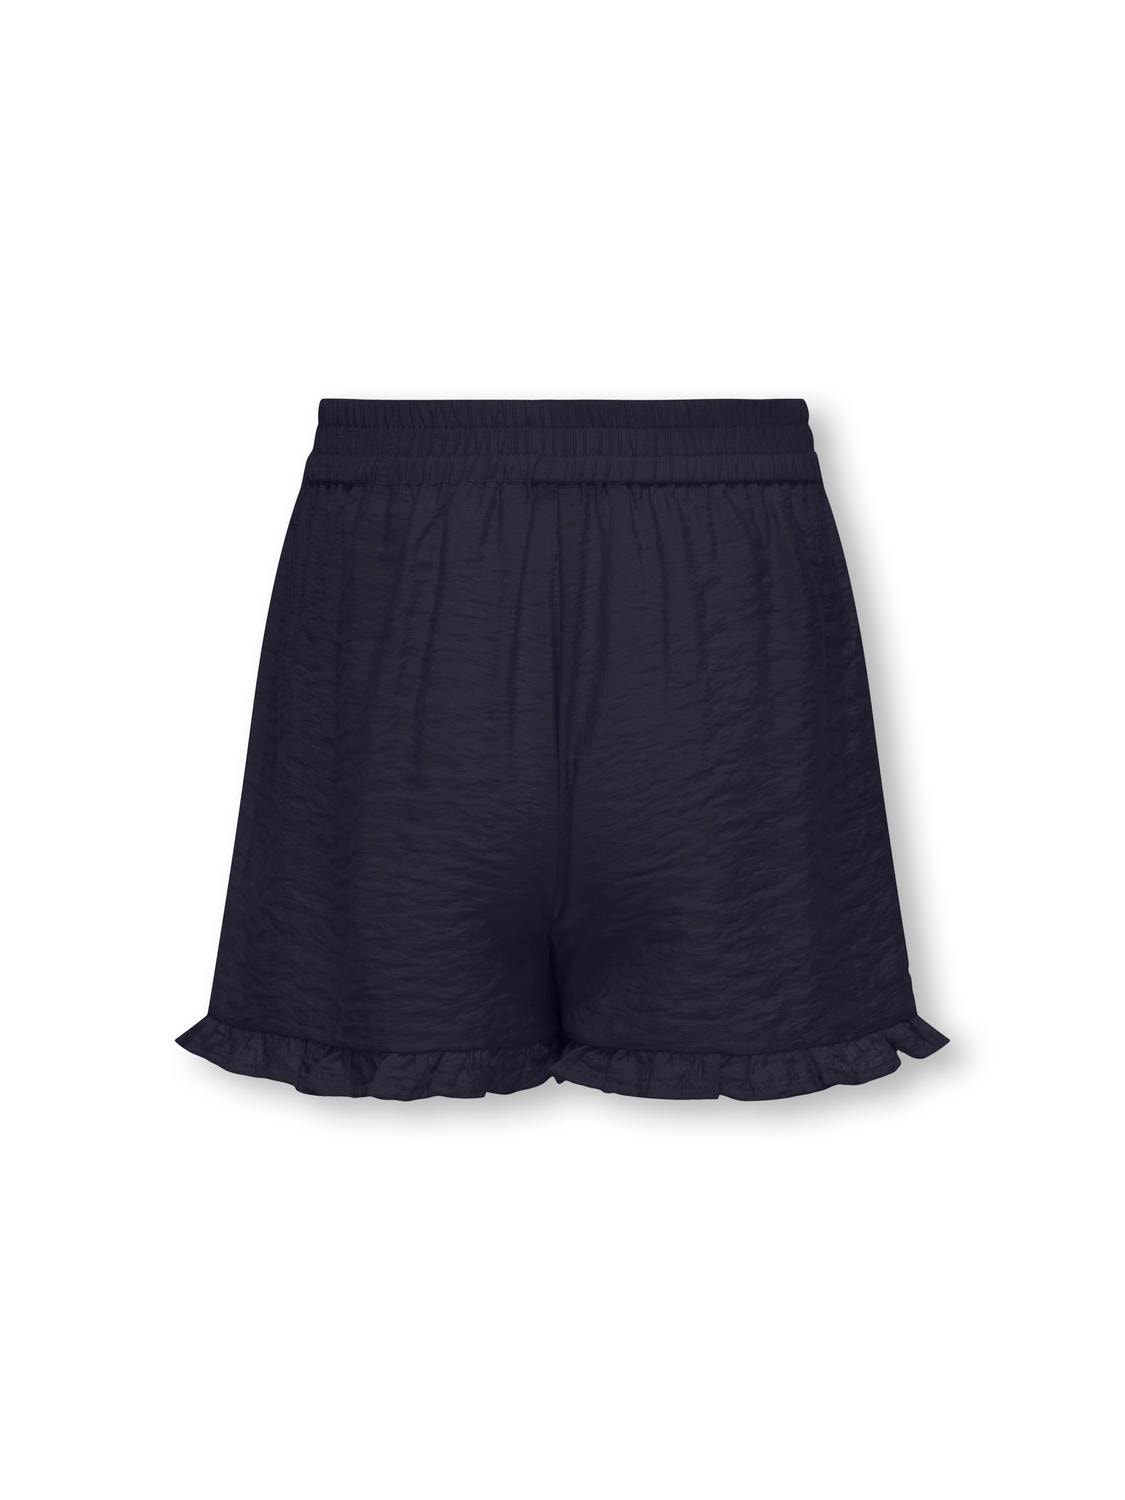 ONLY Normal passform Shorts -Night Sky - 15296962